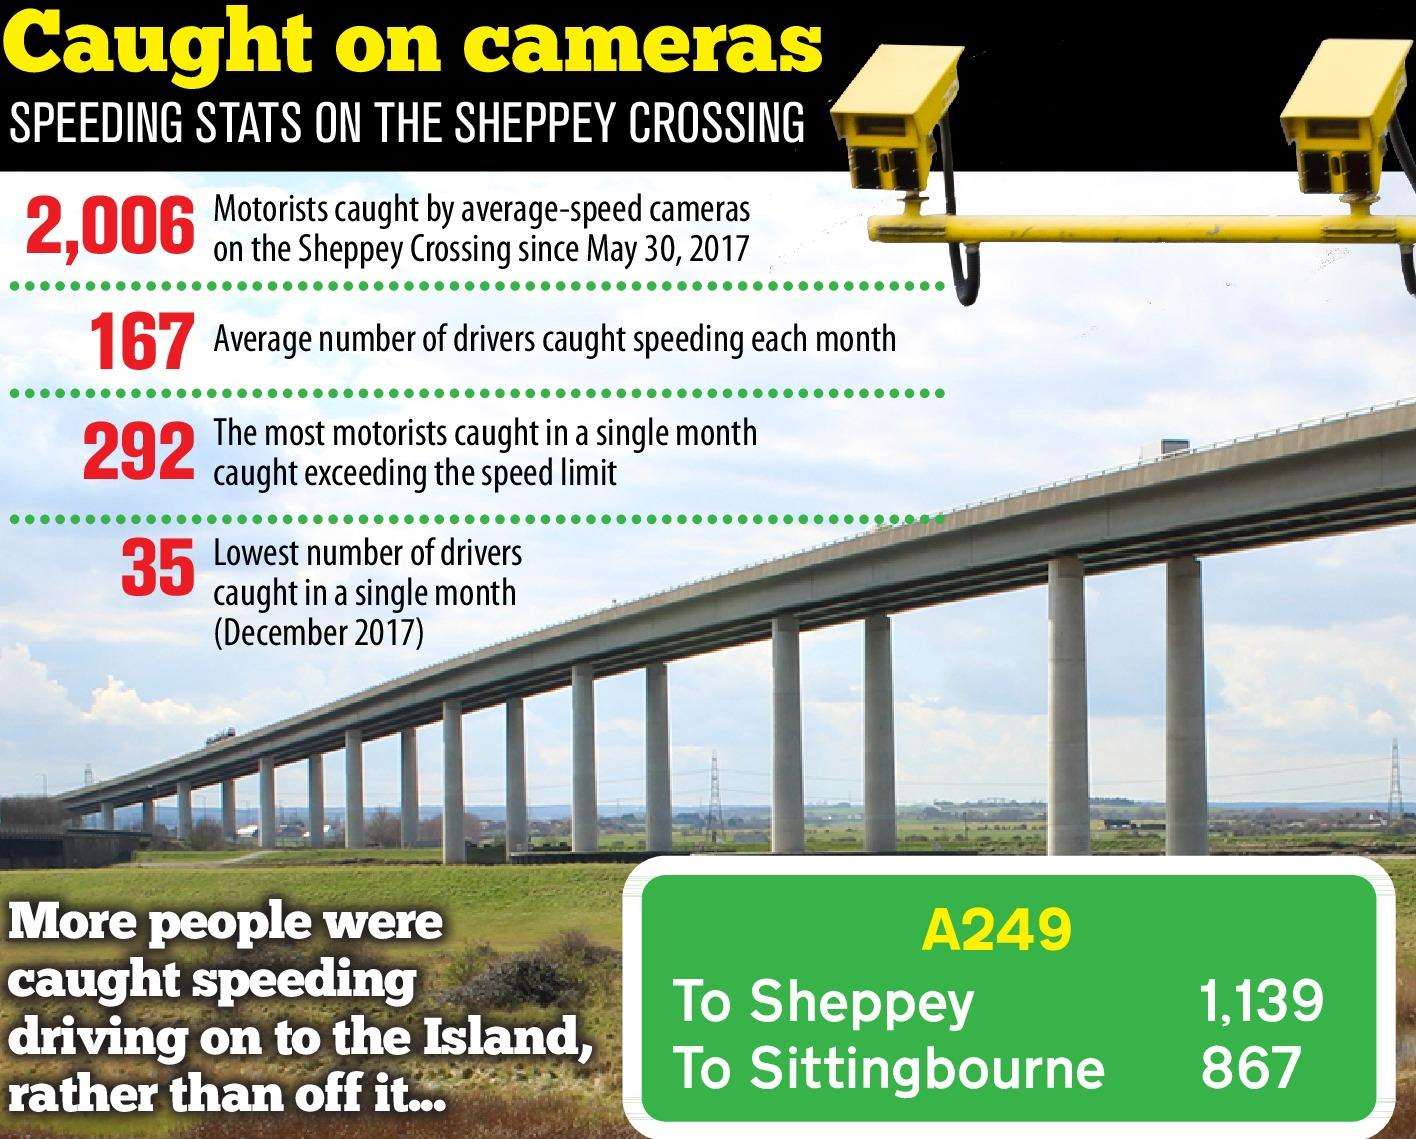 Average-speed cameras on the Sheppey Crossing have been live for a year